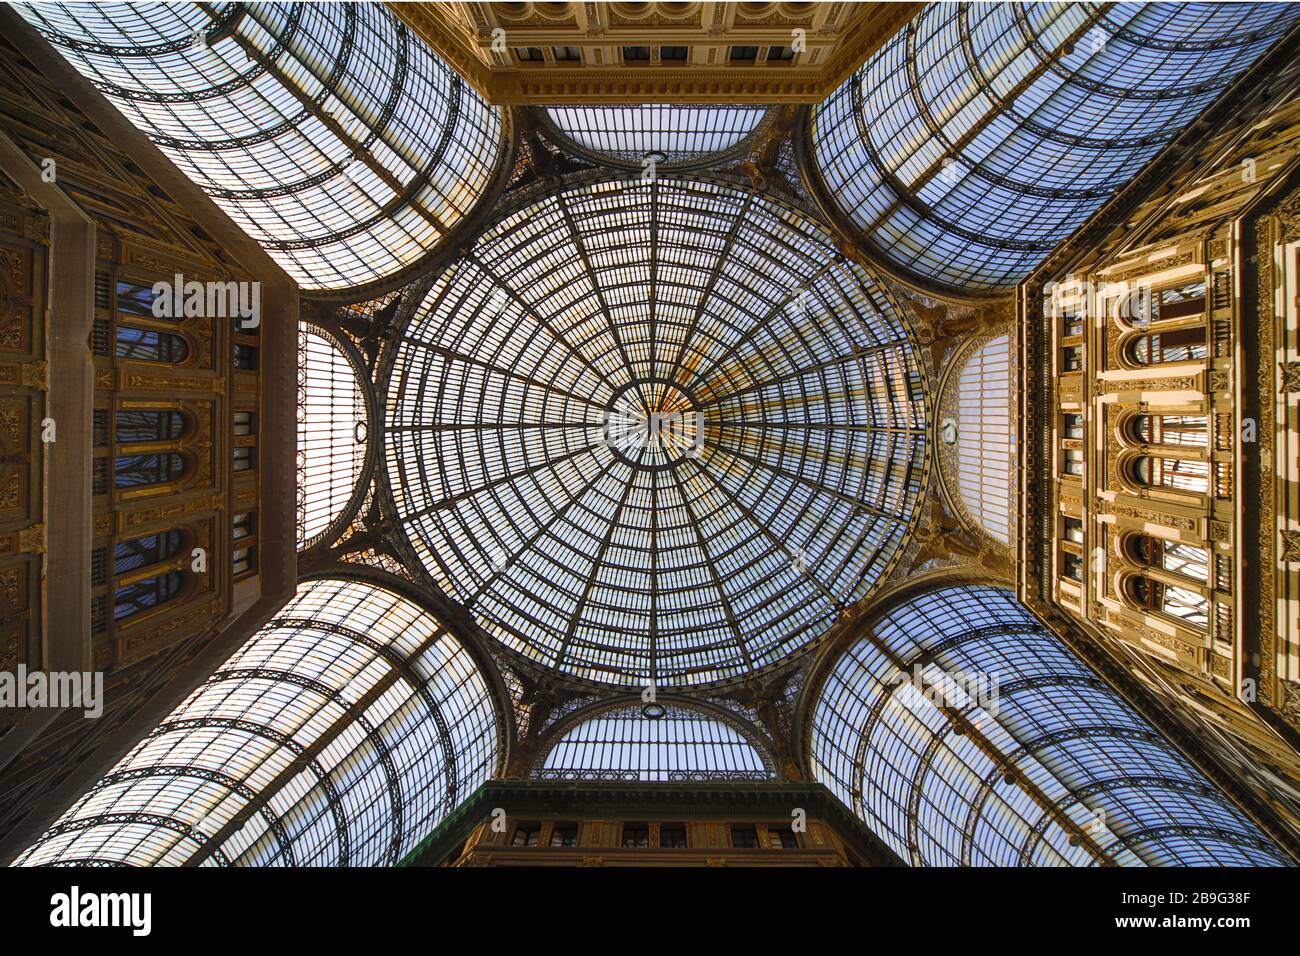 Lookin up at the Roof Symmetry at Galleria Umberto in Neapel, Italien Stockfoto